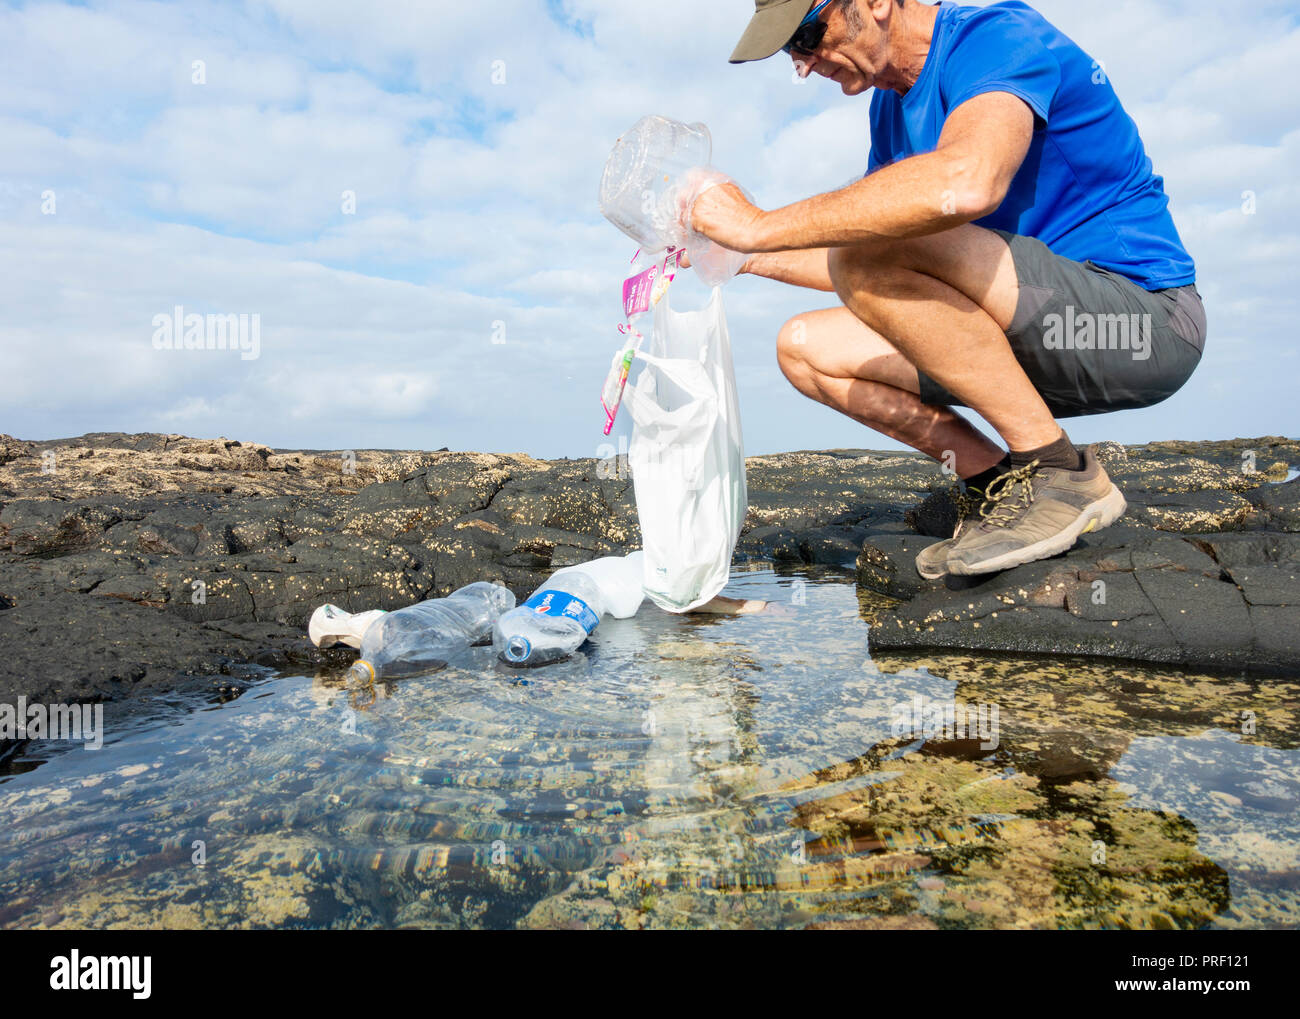 A Plogger/jogger collects plastic rubbish from beach rockpool during his morning run Stock Photo